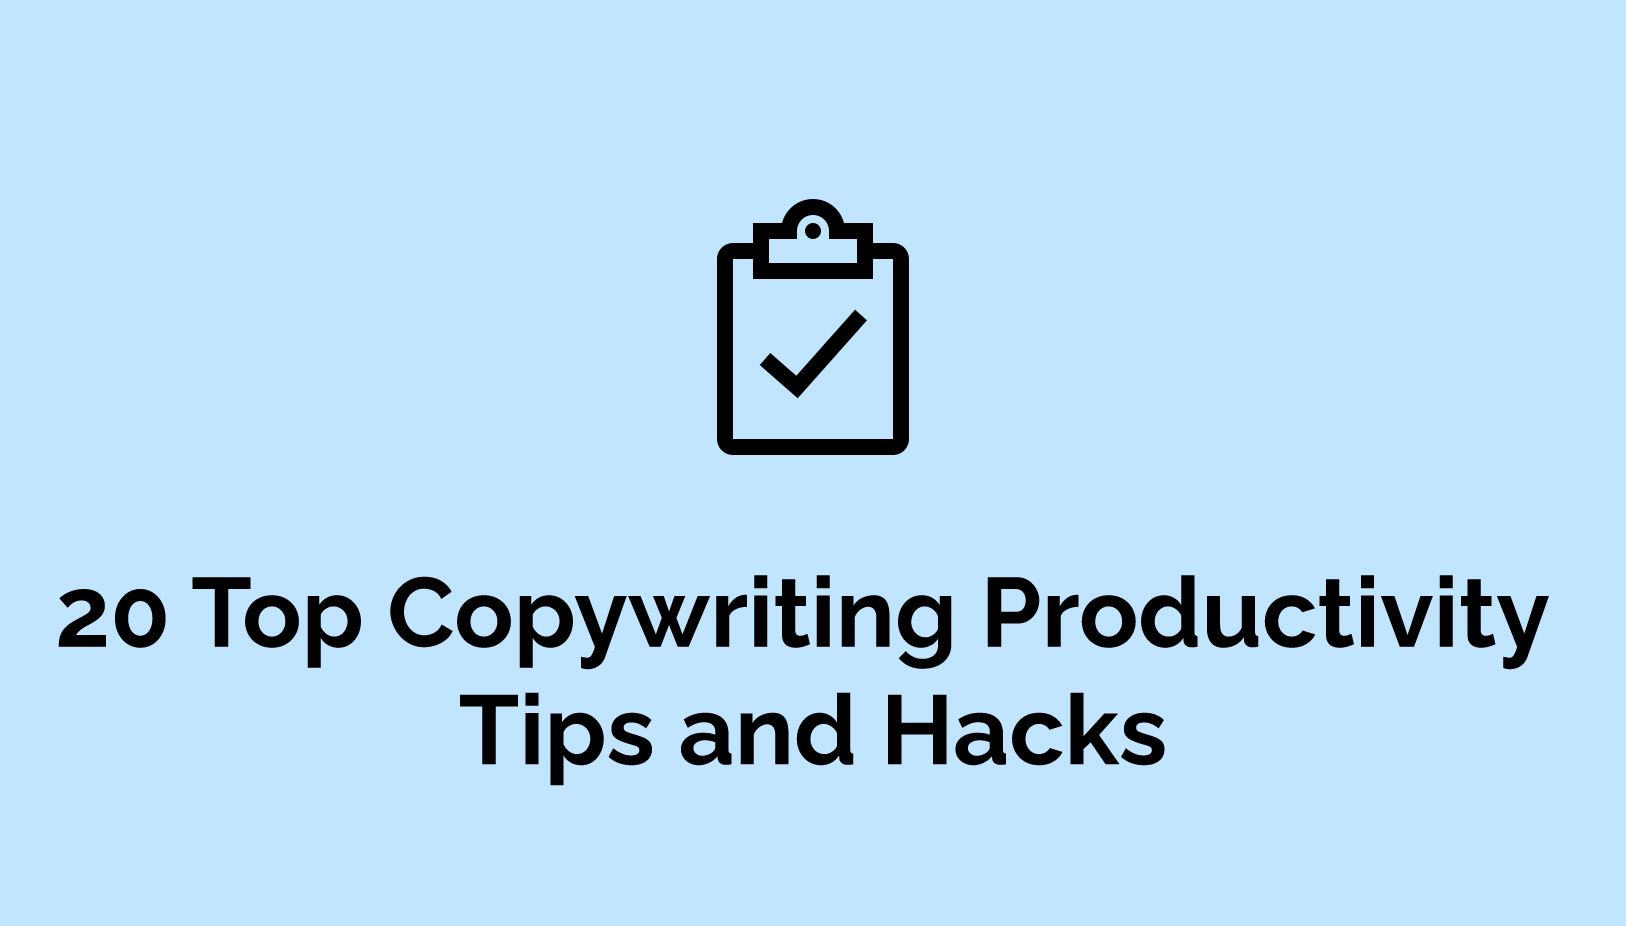 How to Get Things Done: 20 Top Copywriting Productivity Tips and Hacks